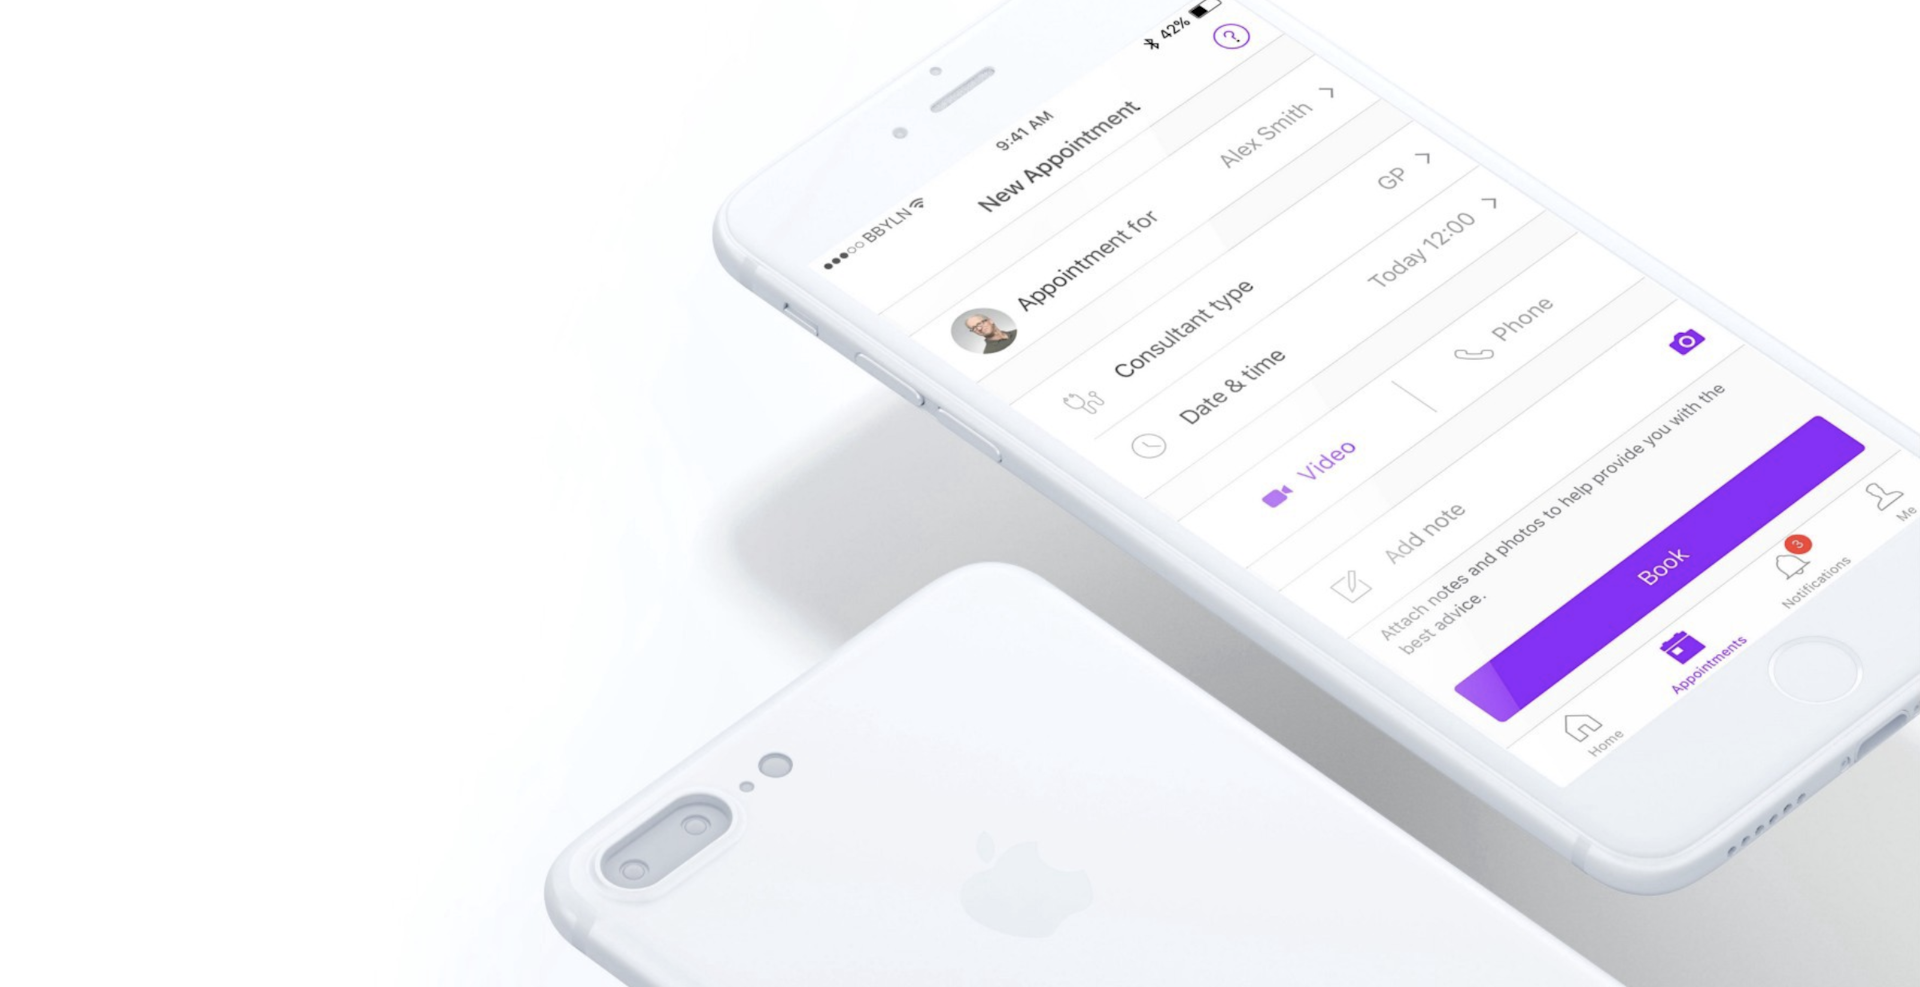 How we designed our new appointment booking experience